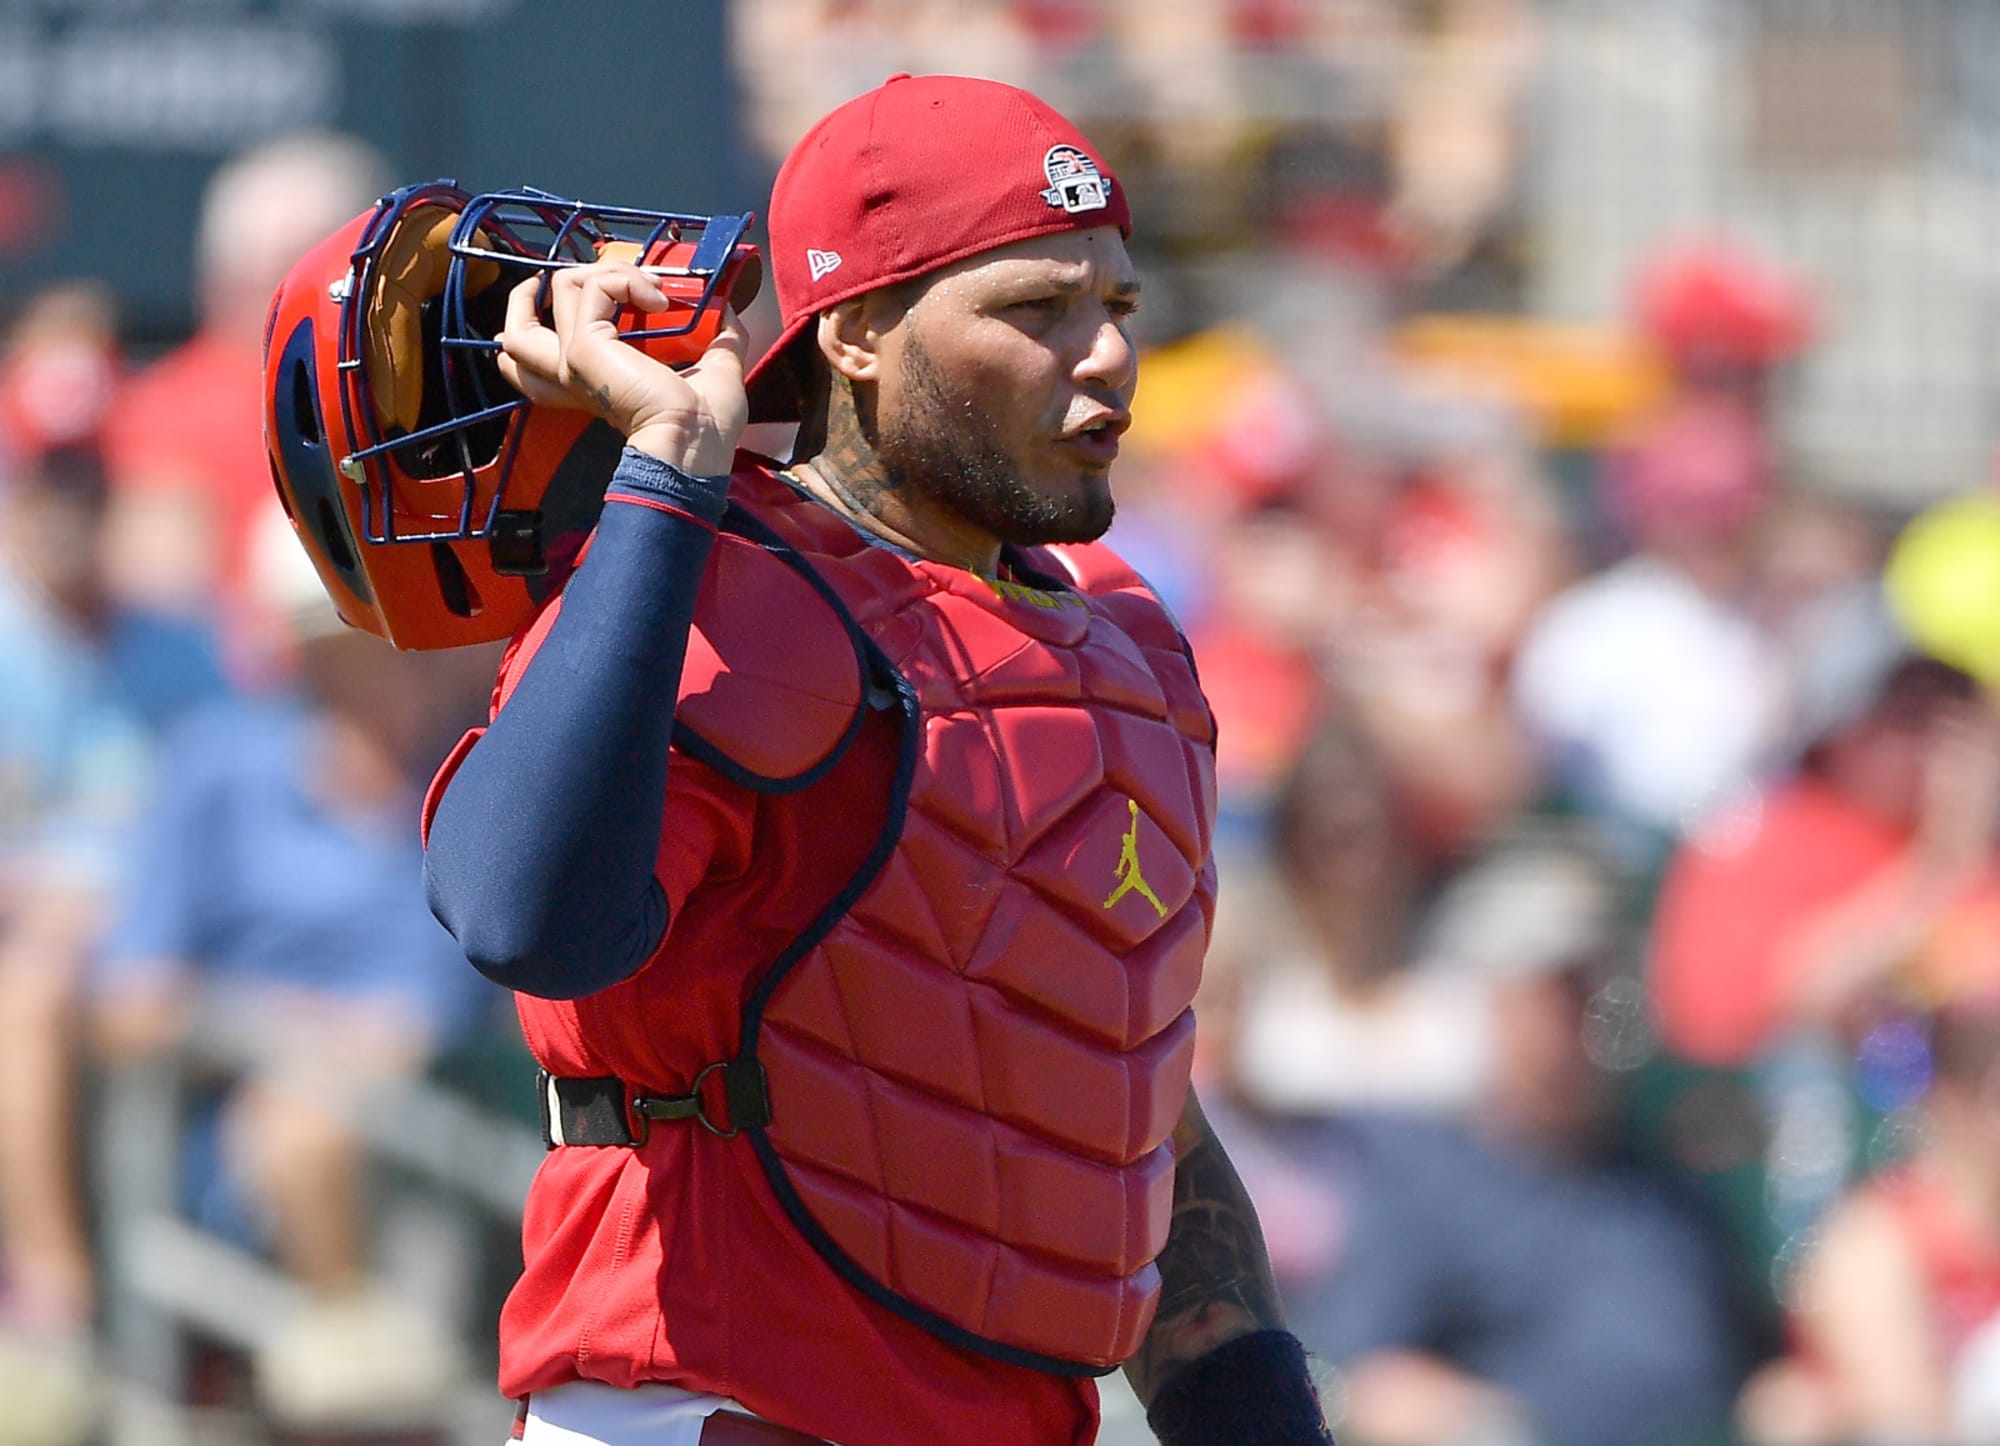 St. Louis Cardinals: Yadier Molina in a 